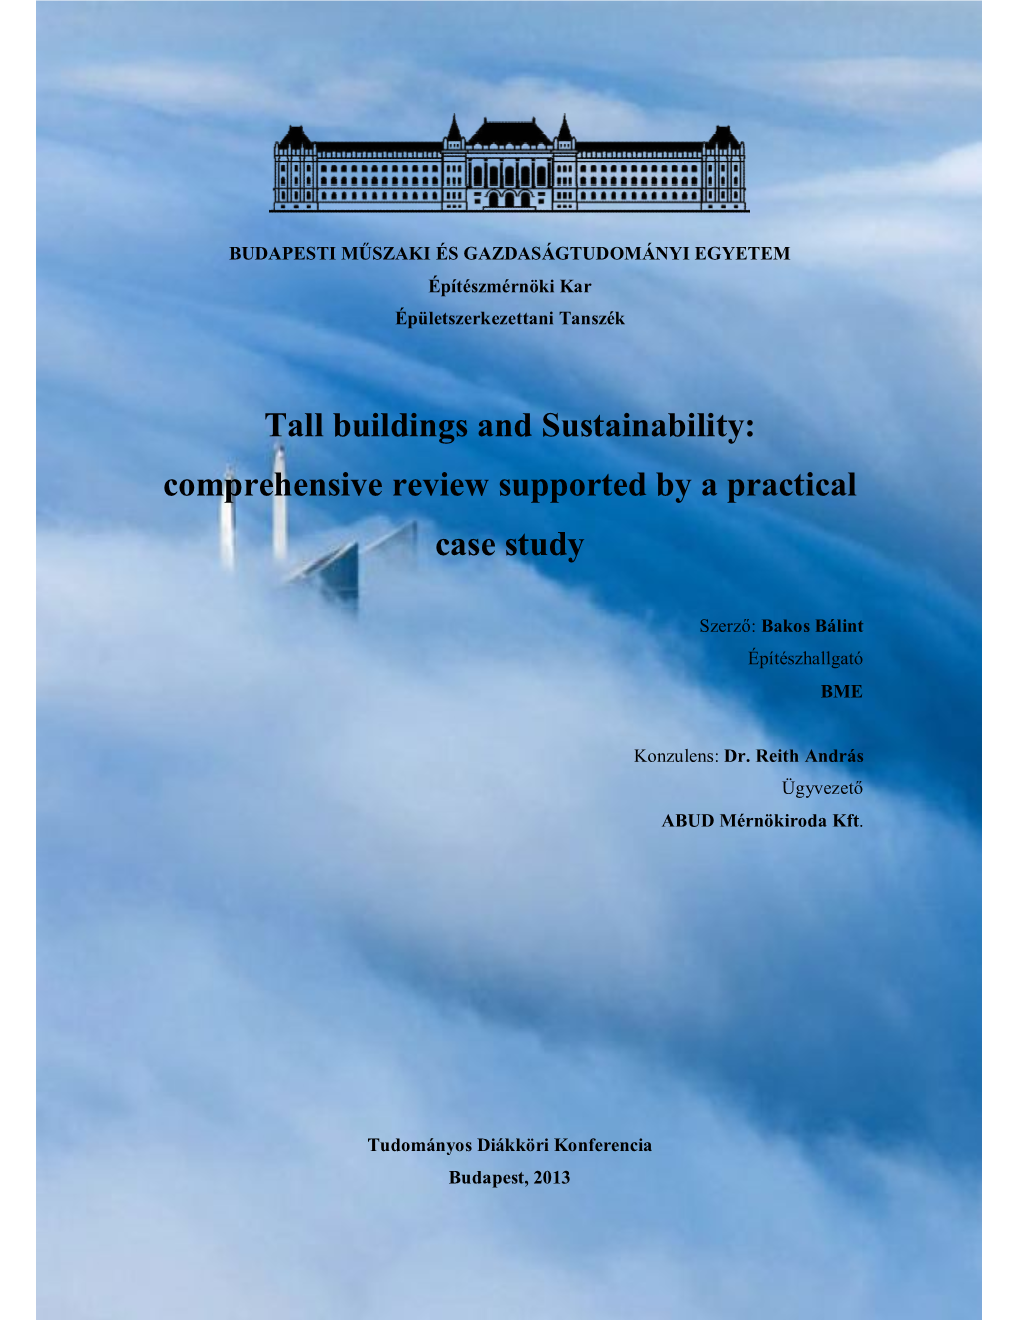 Tall Buildings and Sustainability: Comprehensive Review Supported by a Practical Case Study